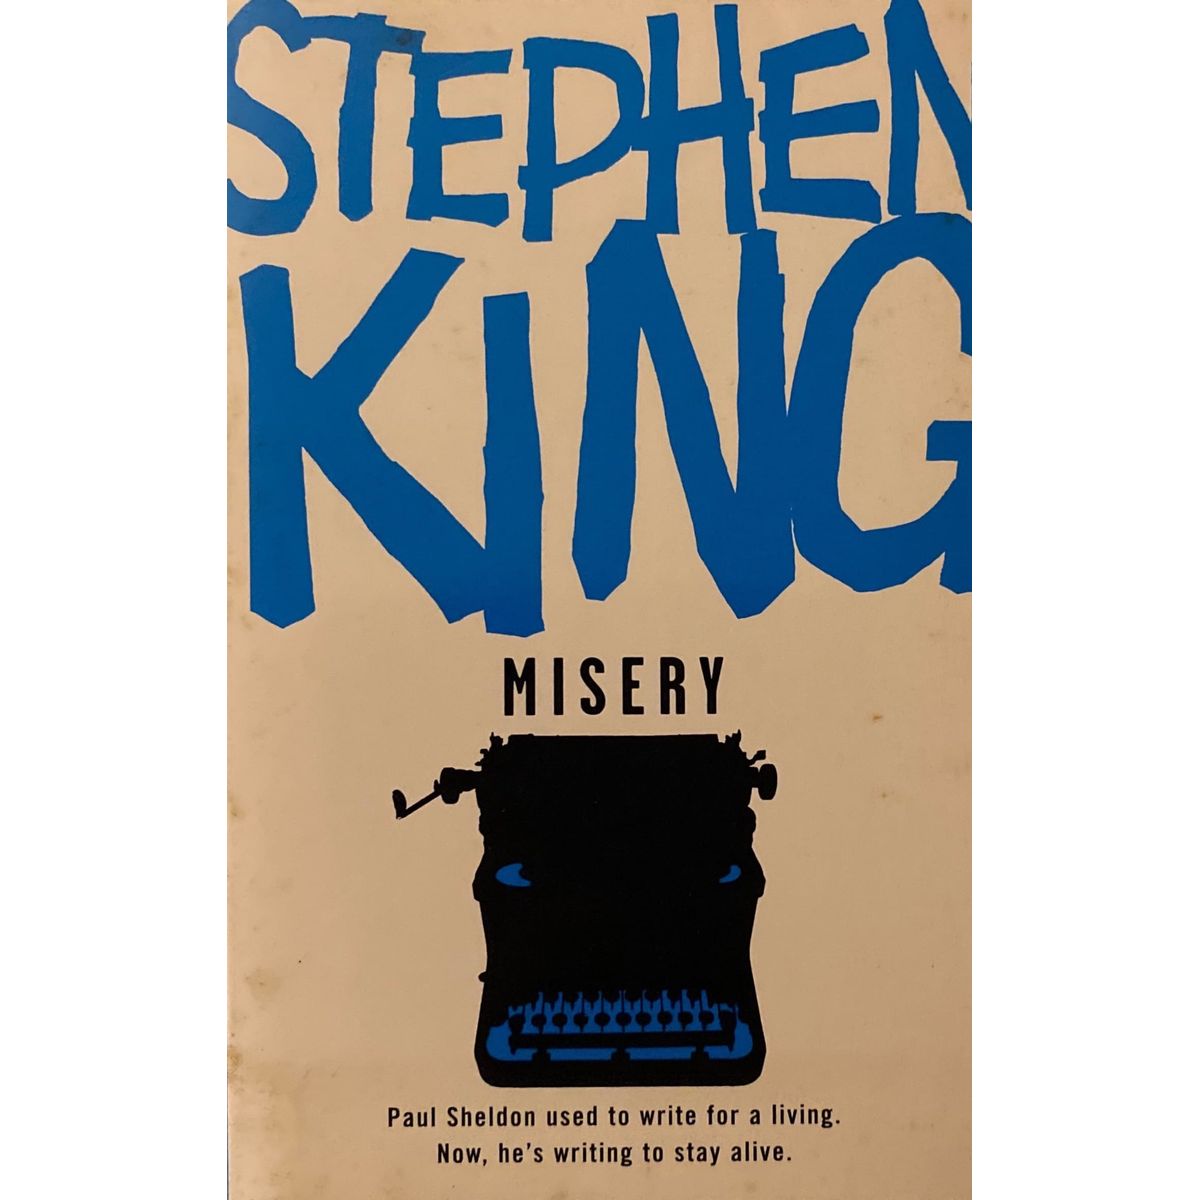 ISBN: 9780340951439 / 0340951435 - Misery by Stephen King [2007]